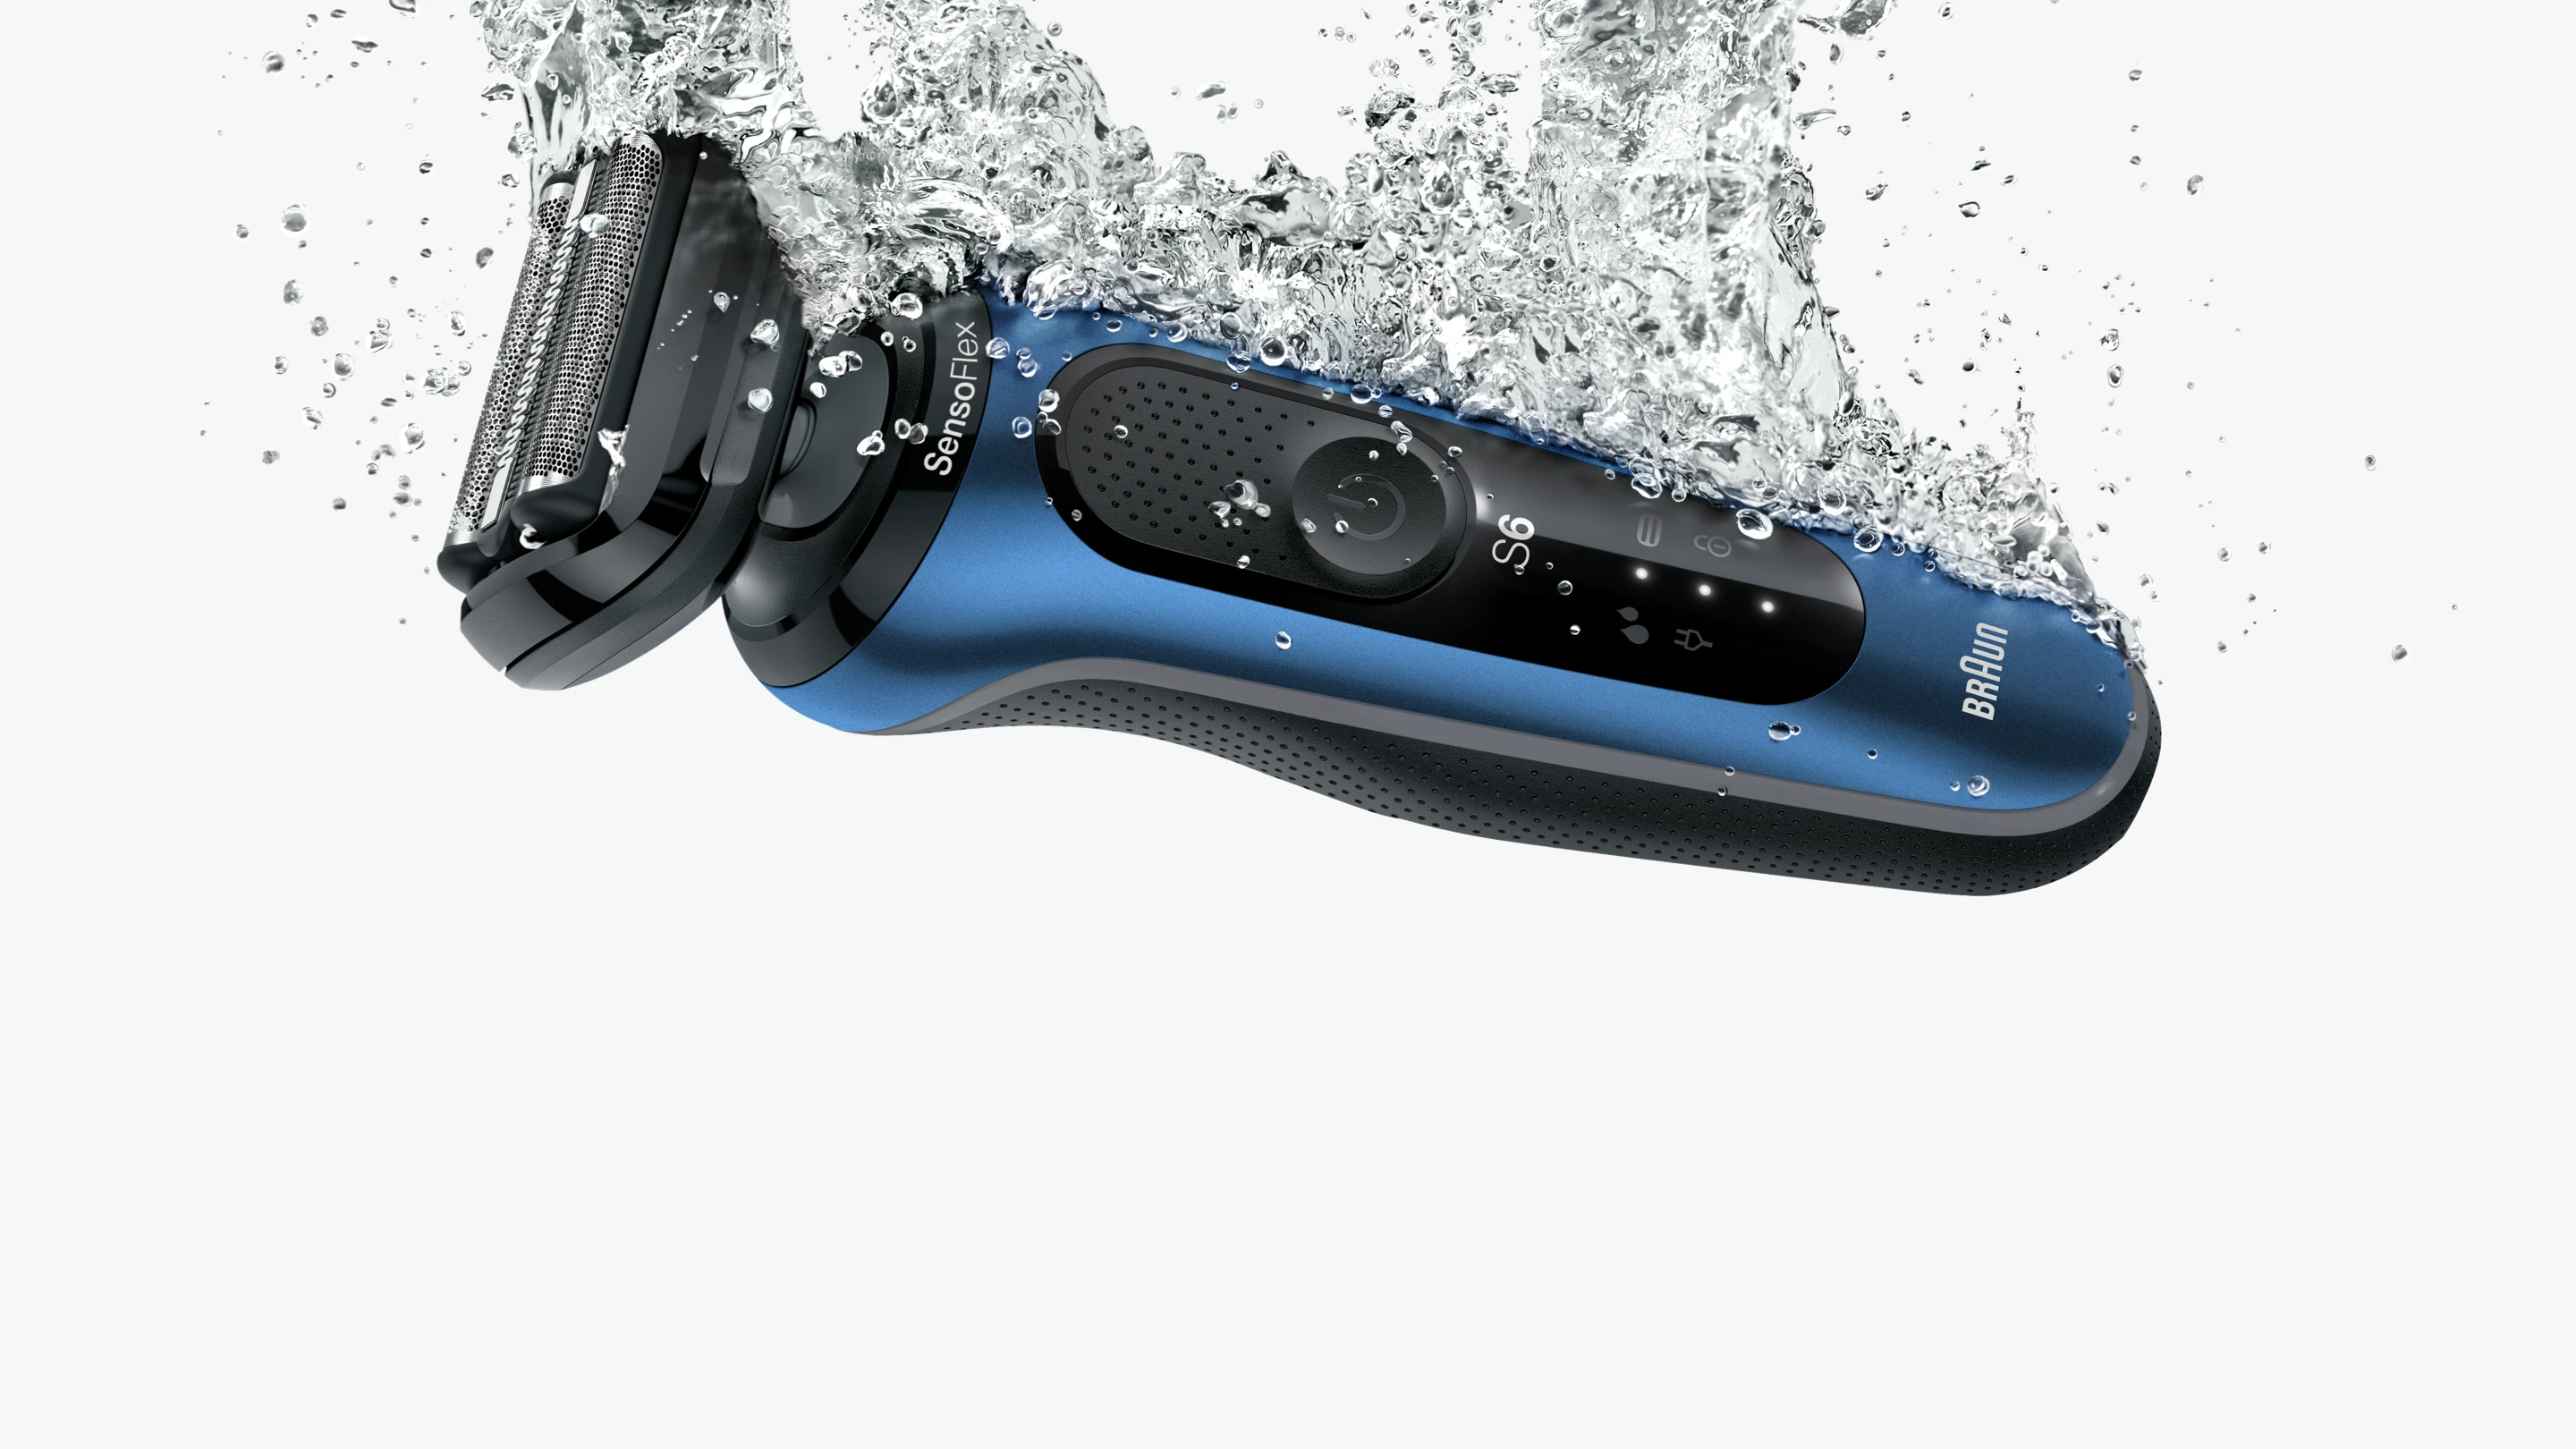 100% waterproof. Shave anyway you want: Wet, dry, with gel or foam.